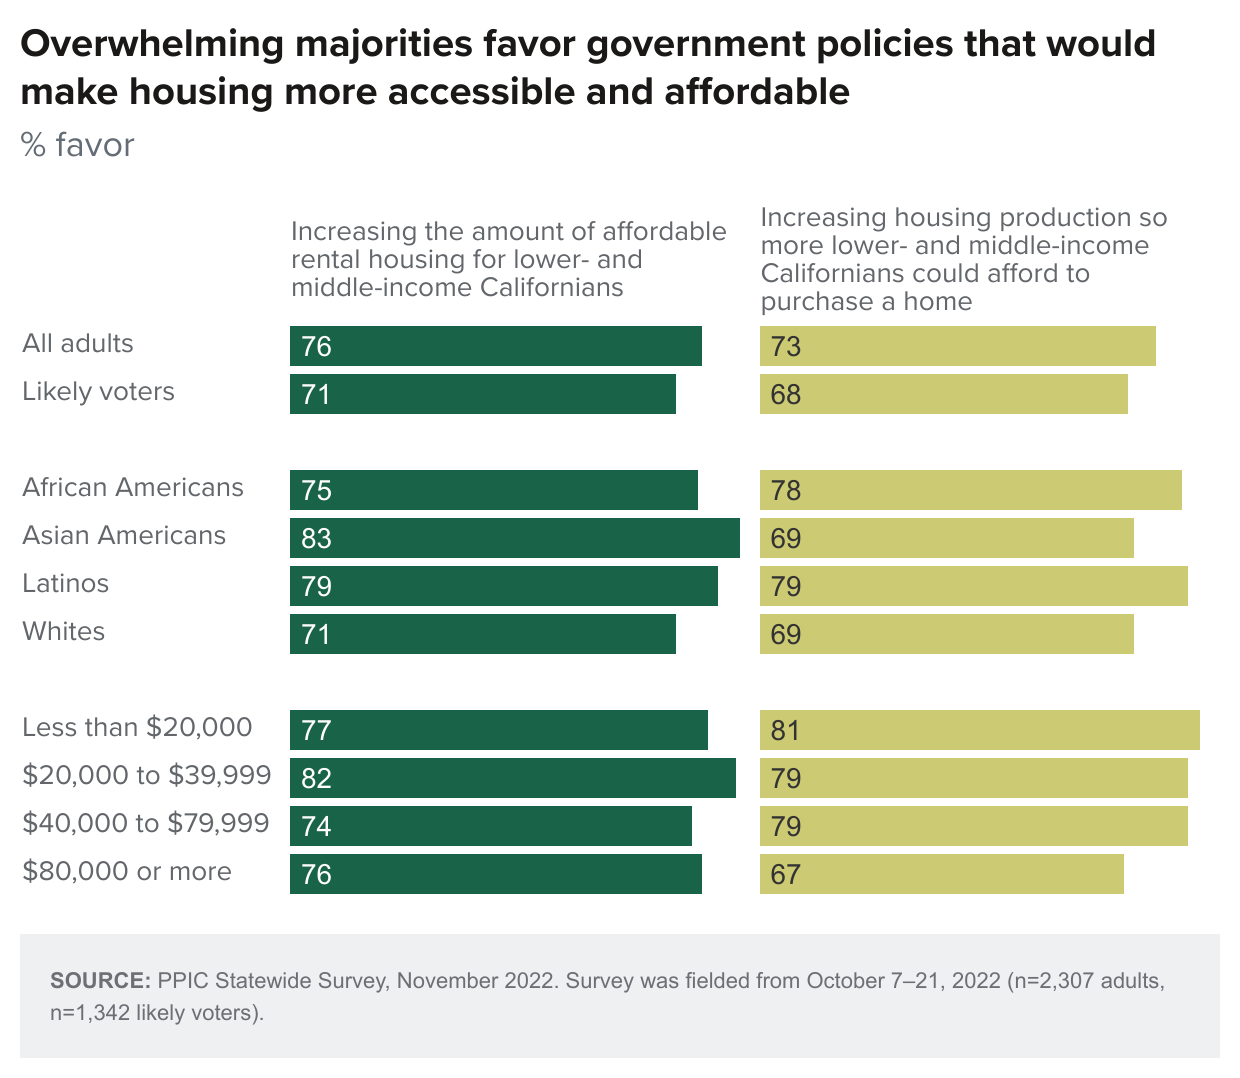 figure - Overwhelming majorities favor government policies that would make housing more accessible and affordable